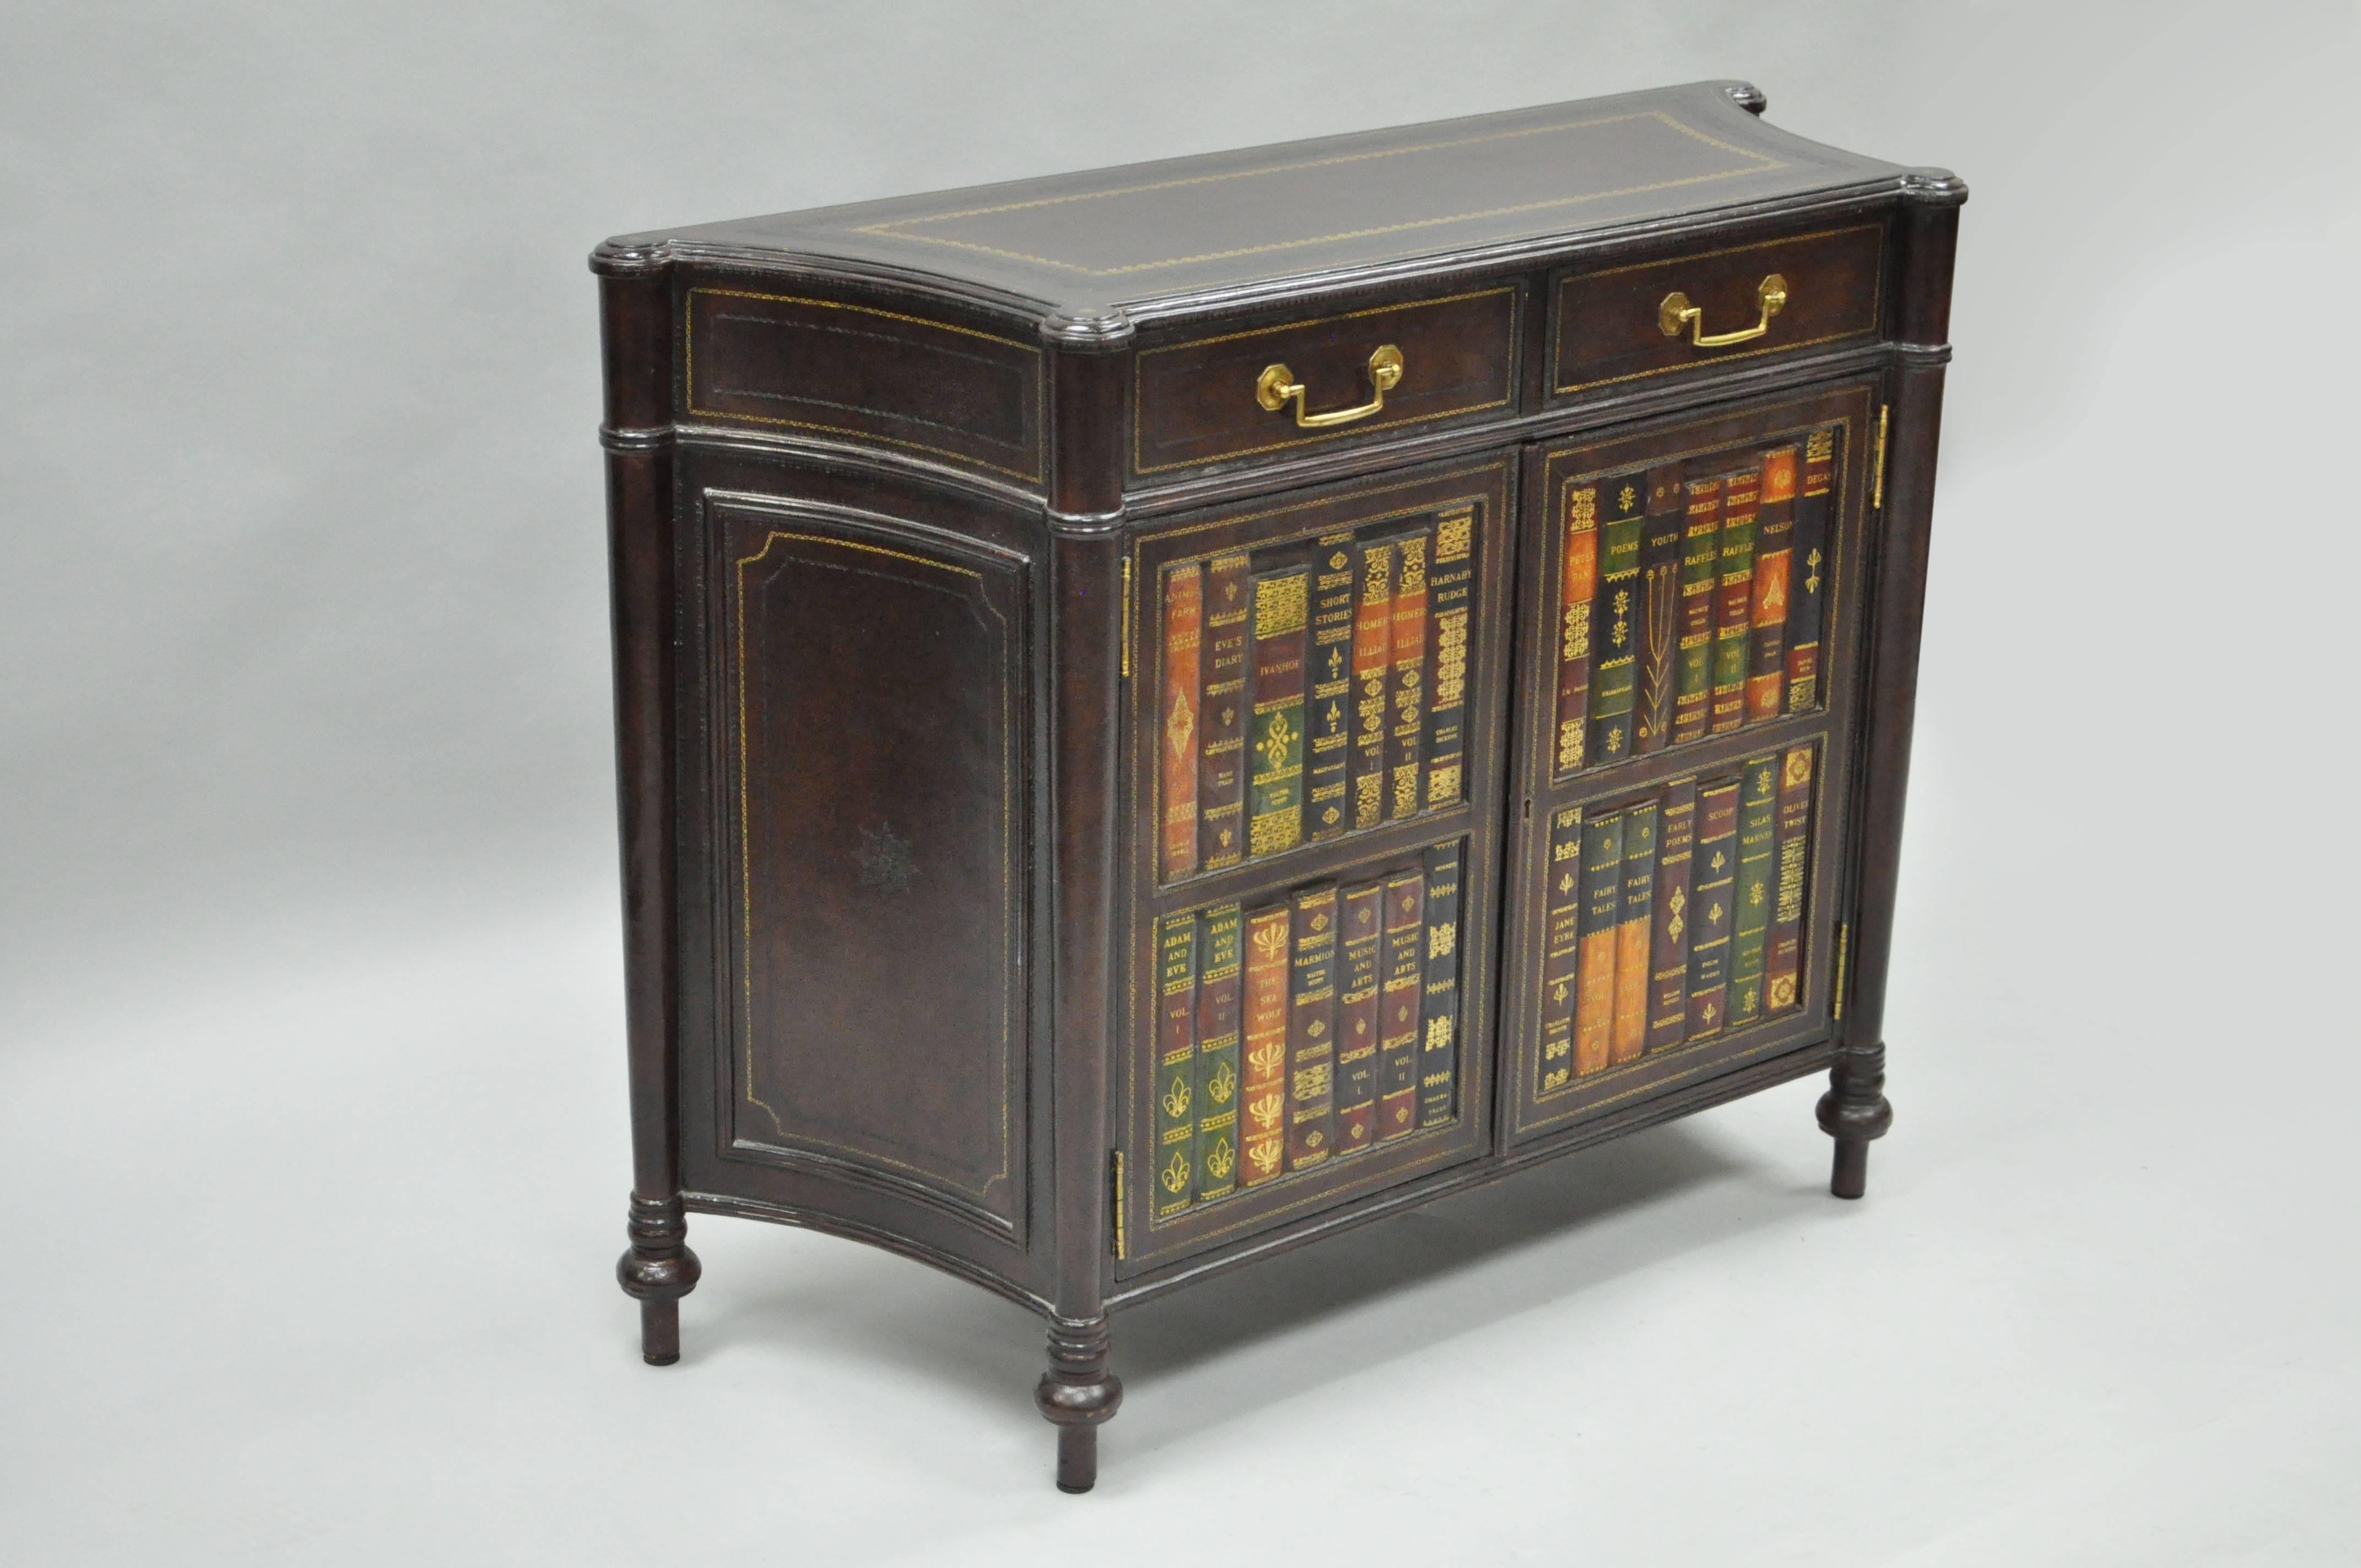 Very unique 20th century tooled leather demilune cabinet by Maitland Smith. Item features a shapely solid wood frame with embossed tooled leather top, front, and sides. Cabinet further features two drawers and two lower swing doors with faux book